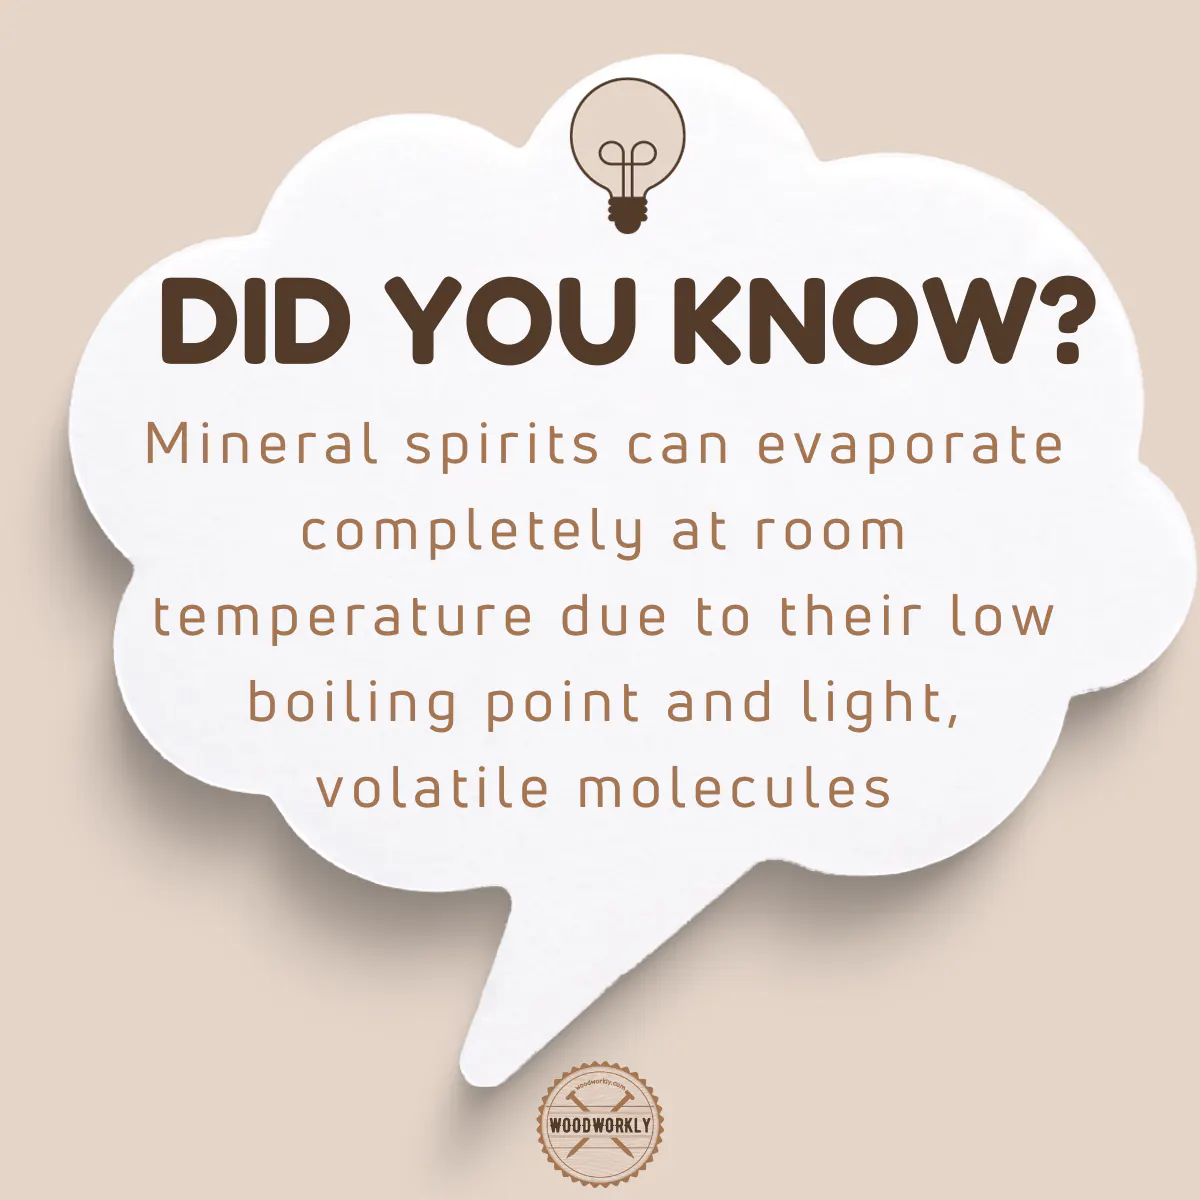 Did you know fact about the evaporation of mineral spirits